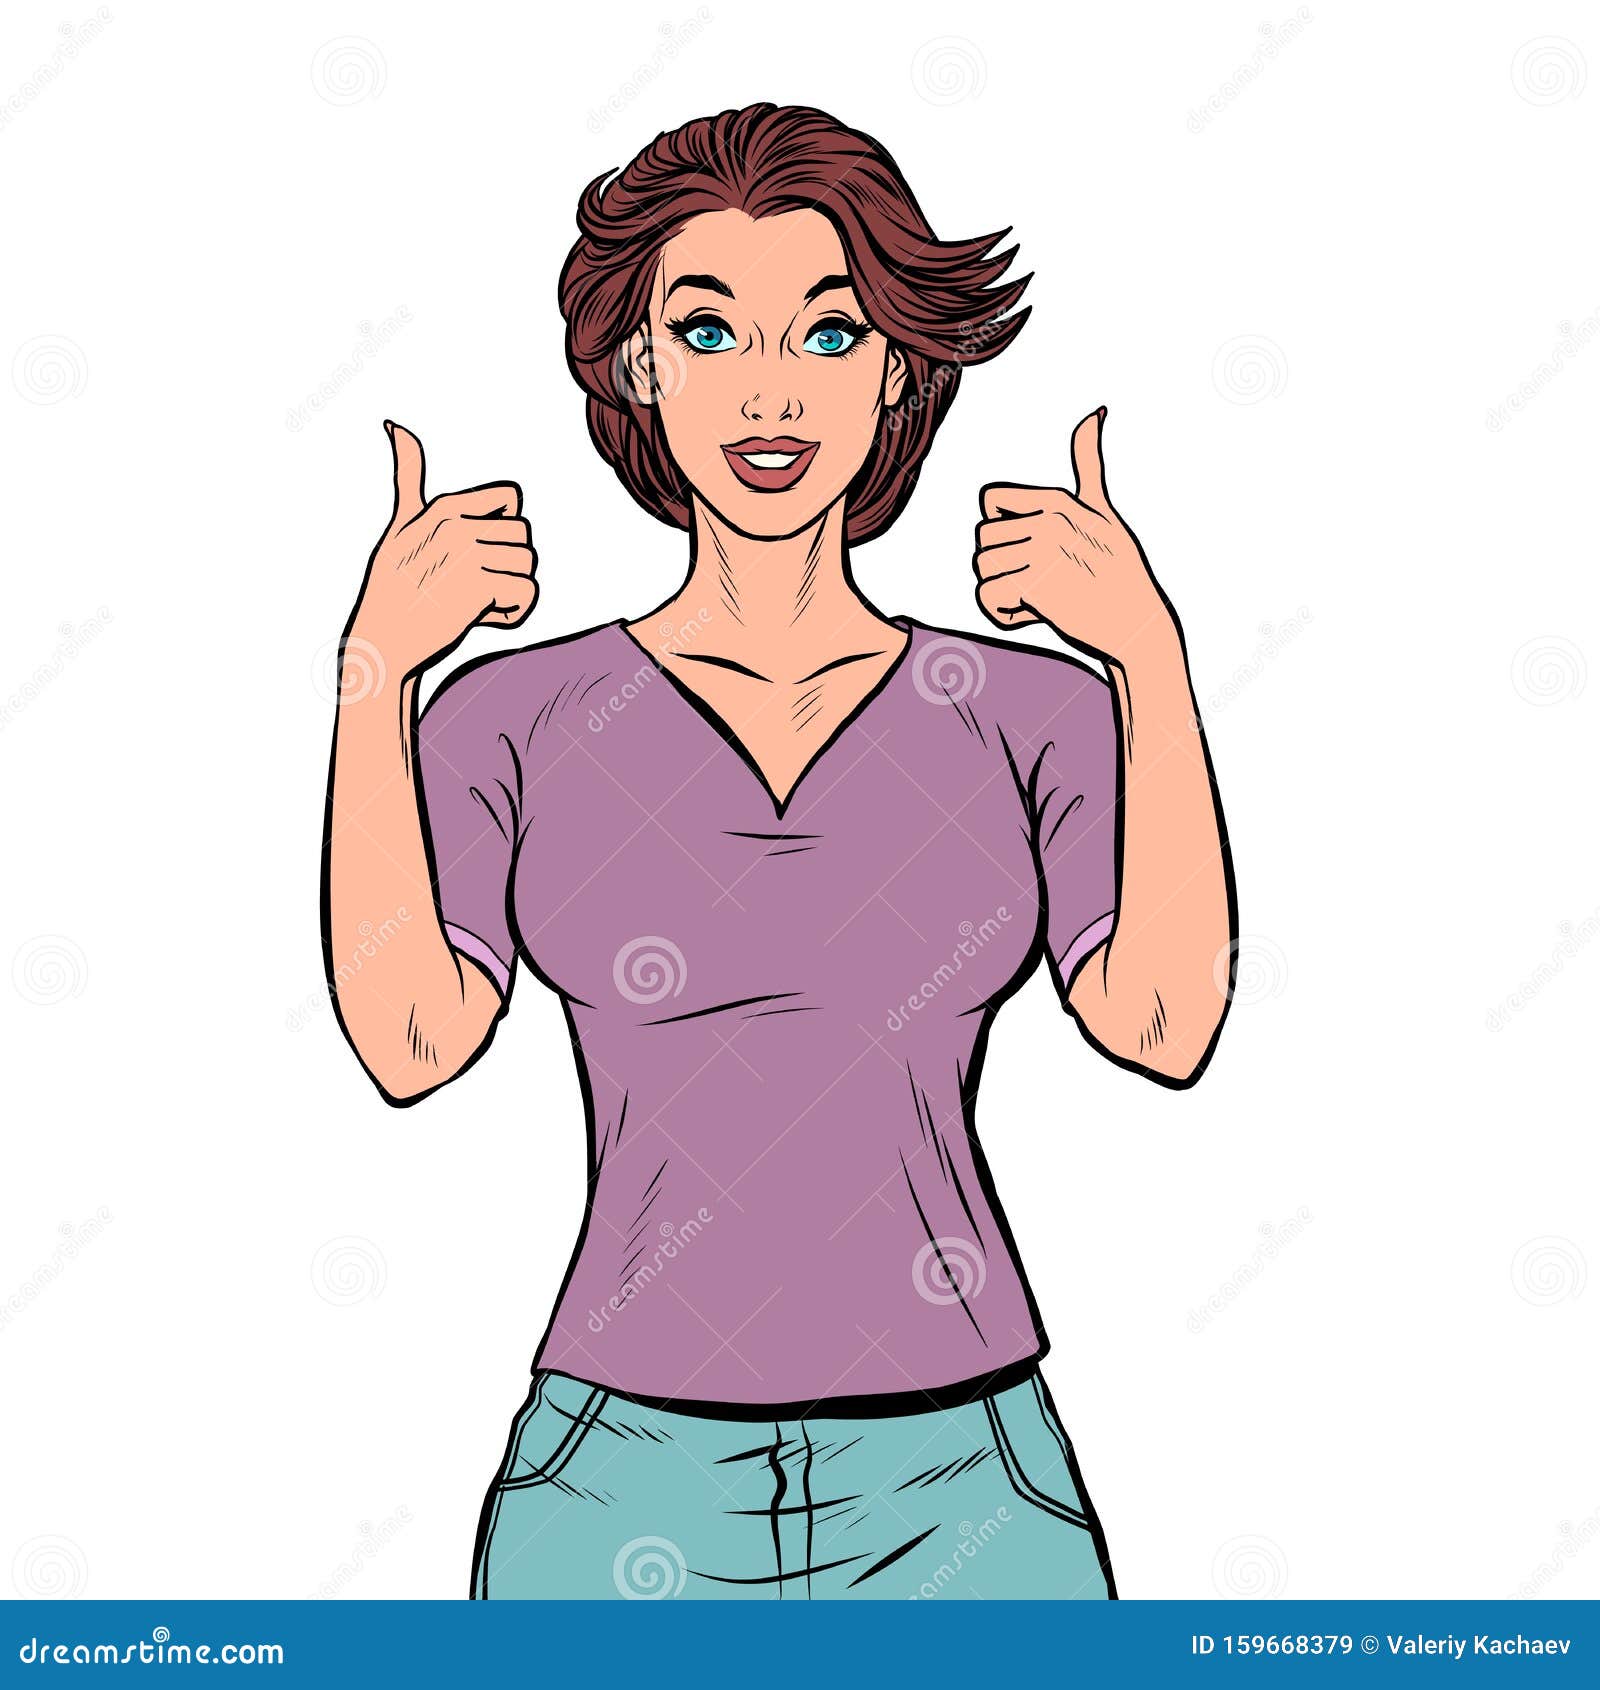 28 Collection Of Thumbs Up Drawing Png - Thumbs Up Clip Art - Free  Transparent PNG Download - PNGkey